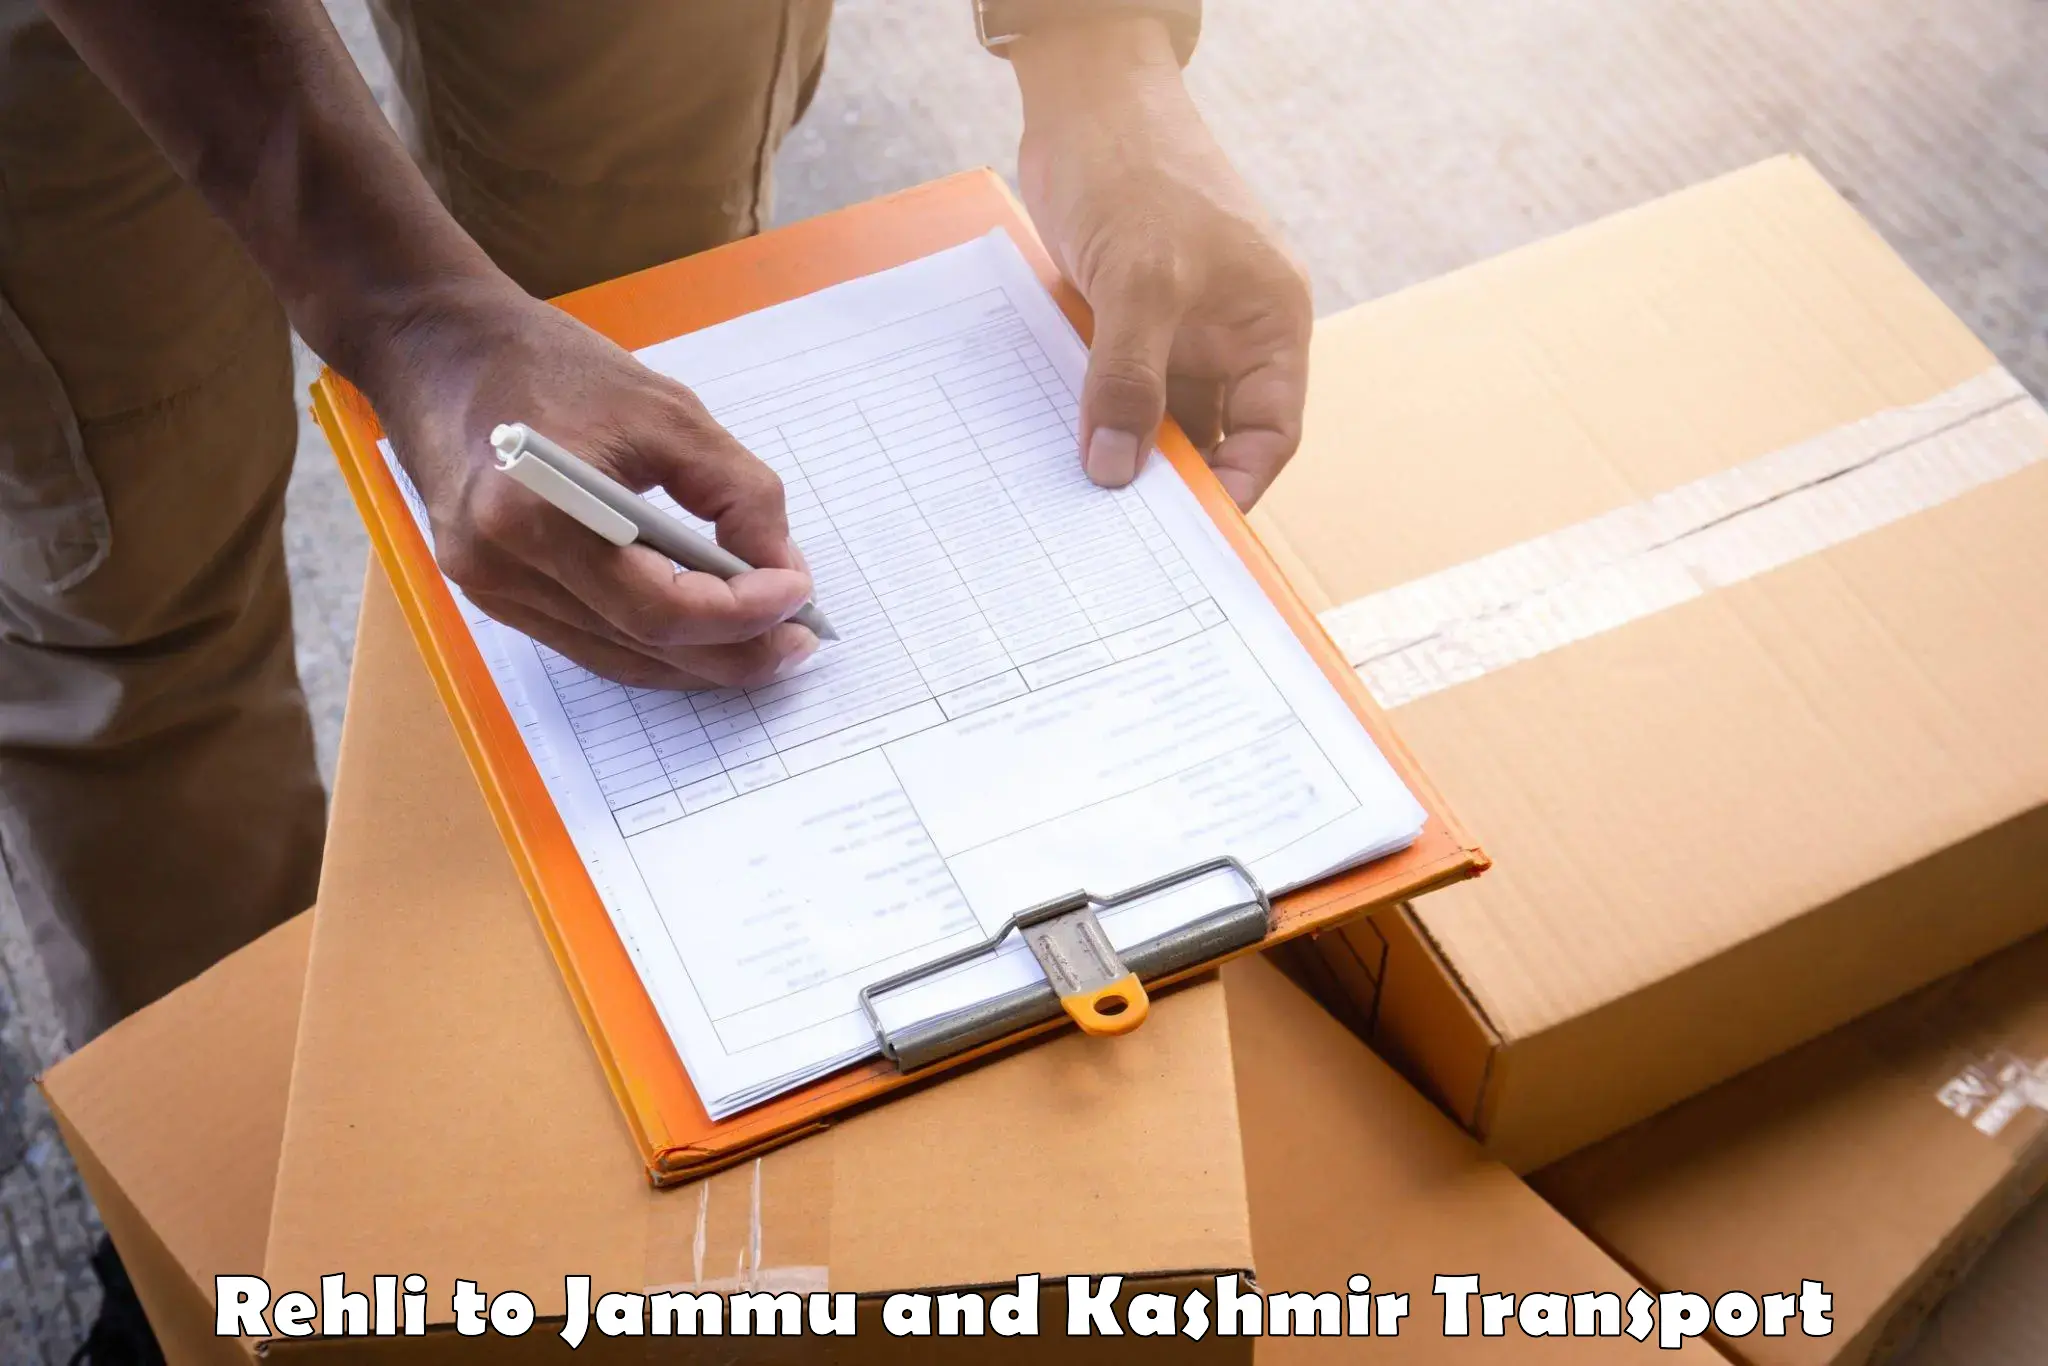 Container transport service Rehli to Jammu and Kashmir